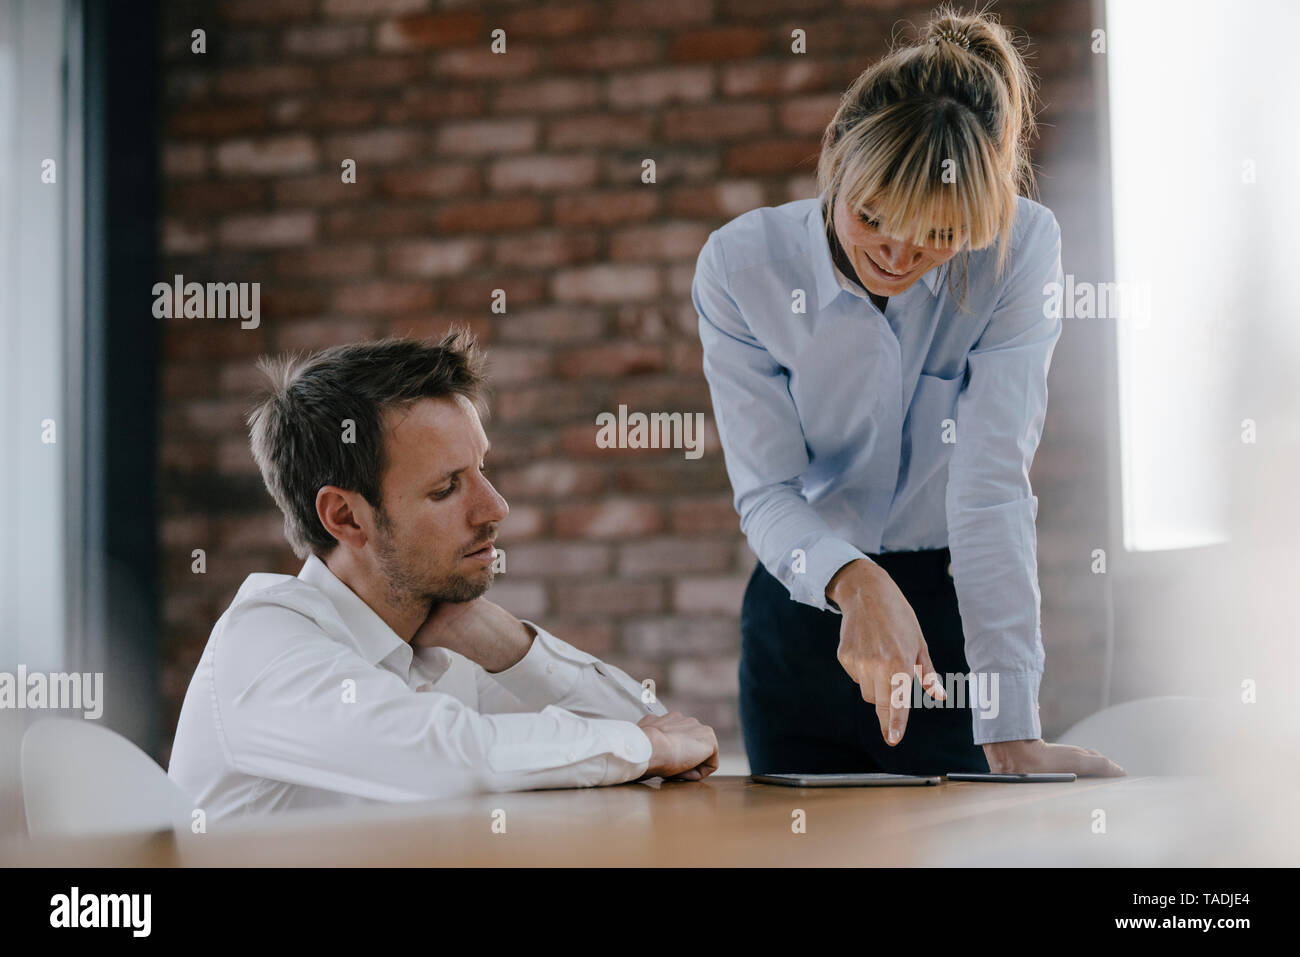 Business people working together on a project, using laptop Stock Photo